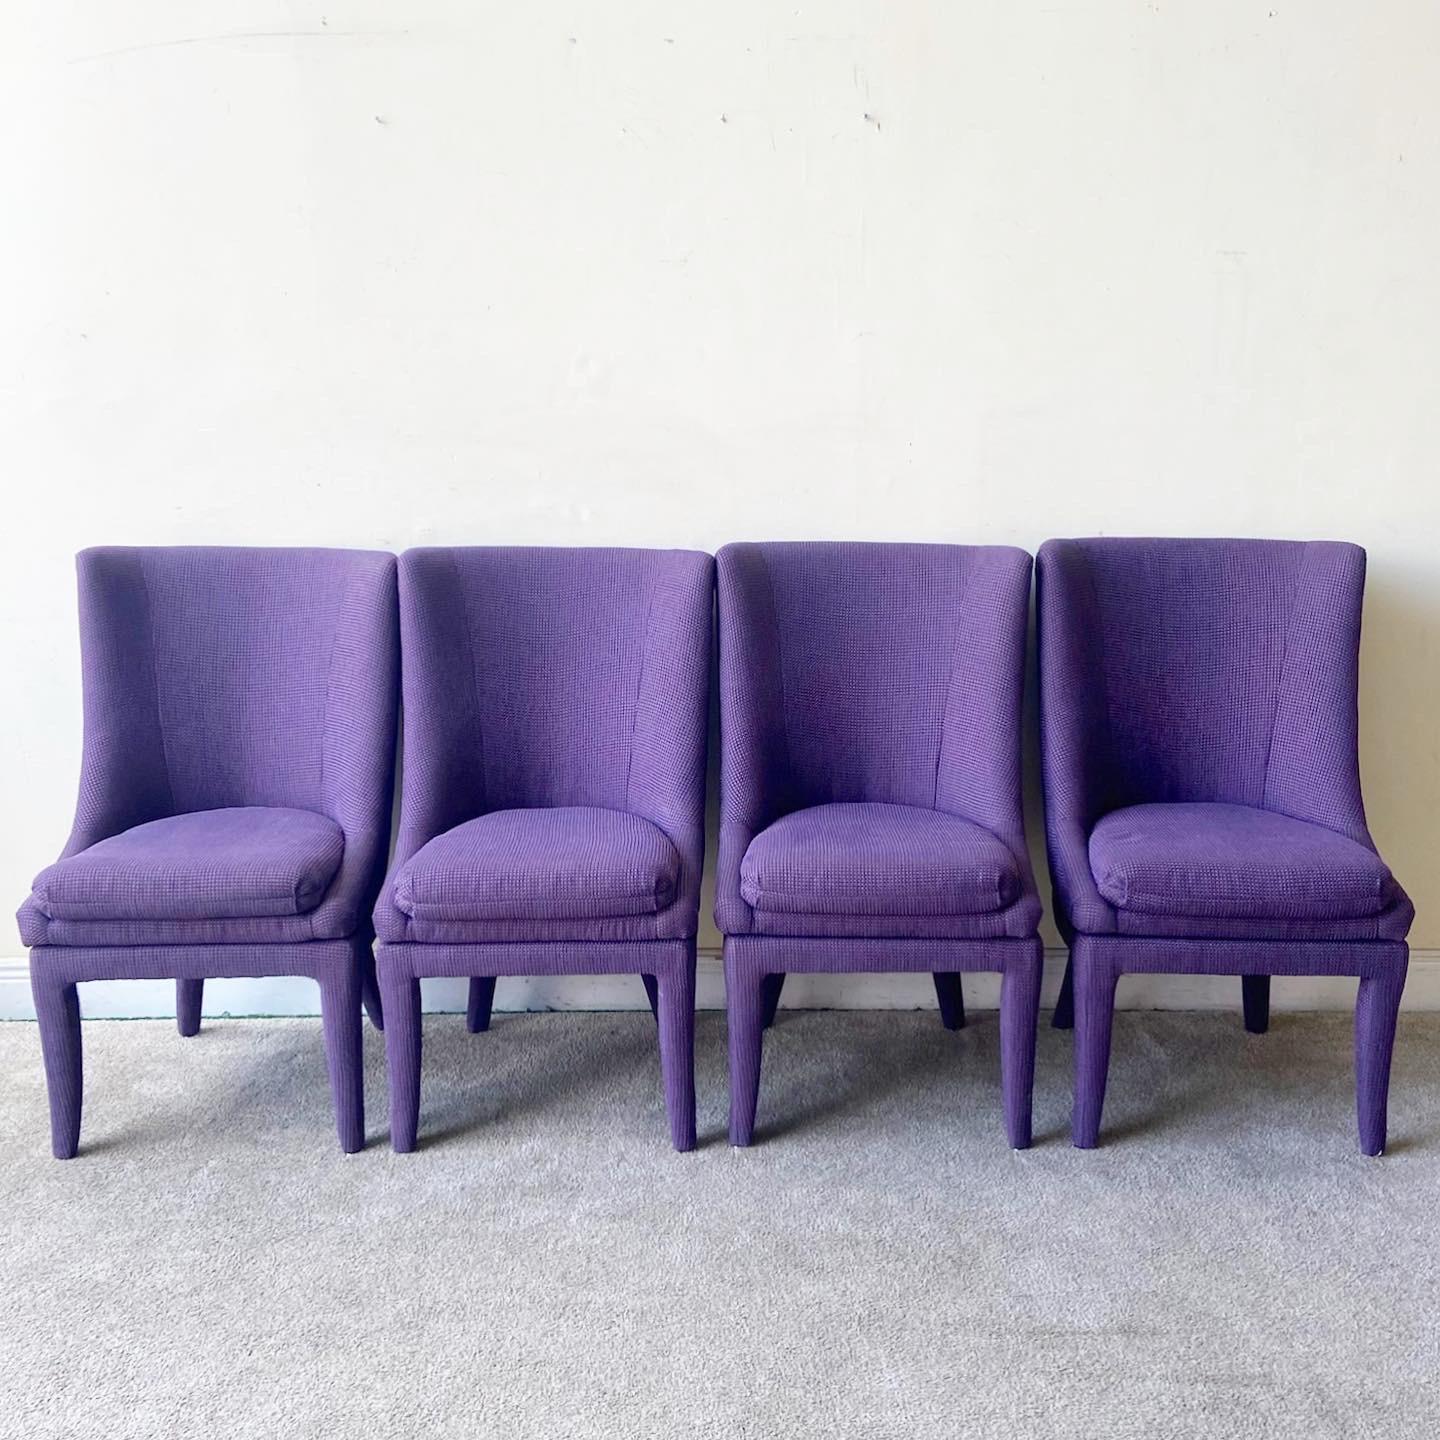 Amazing set of 4 postmodern dining chairs by Carson’s. Each feature a swivel top with a purple fabric.
 